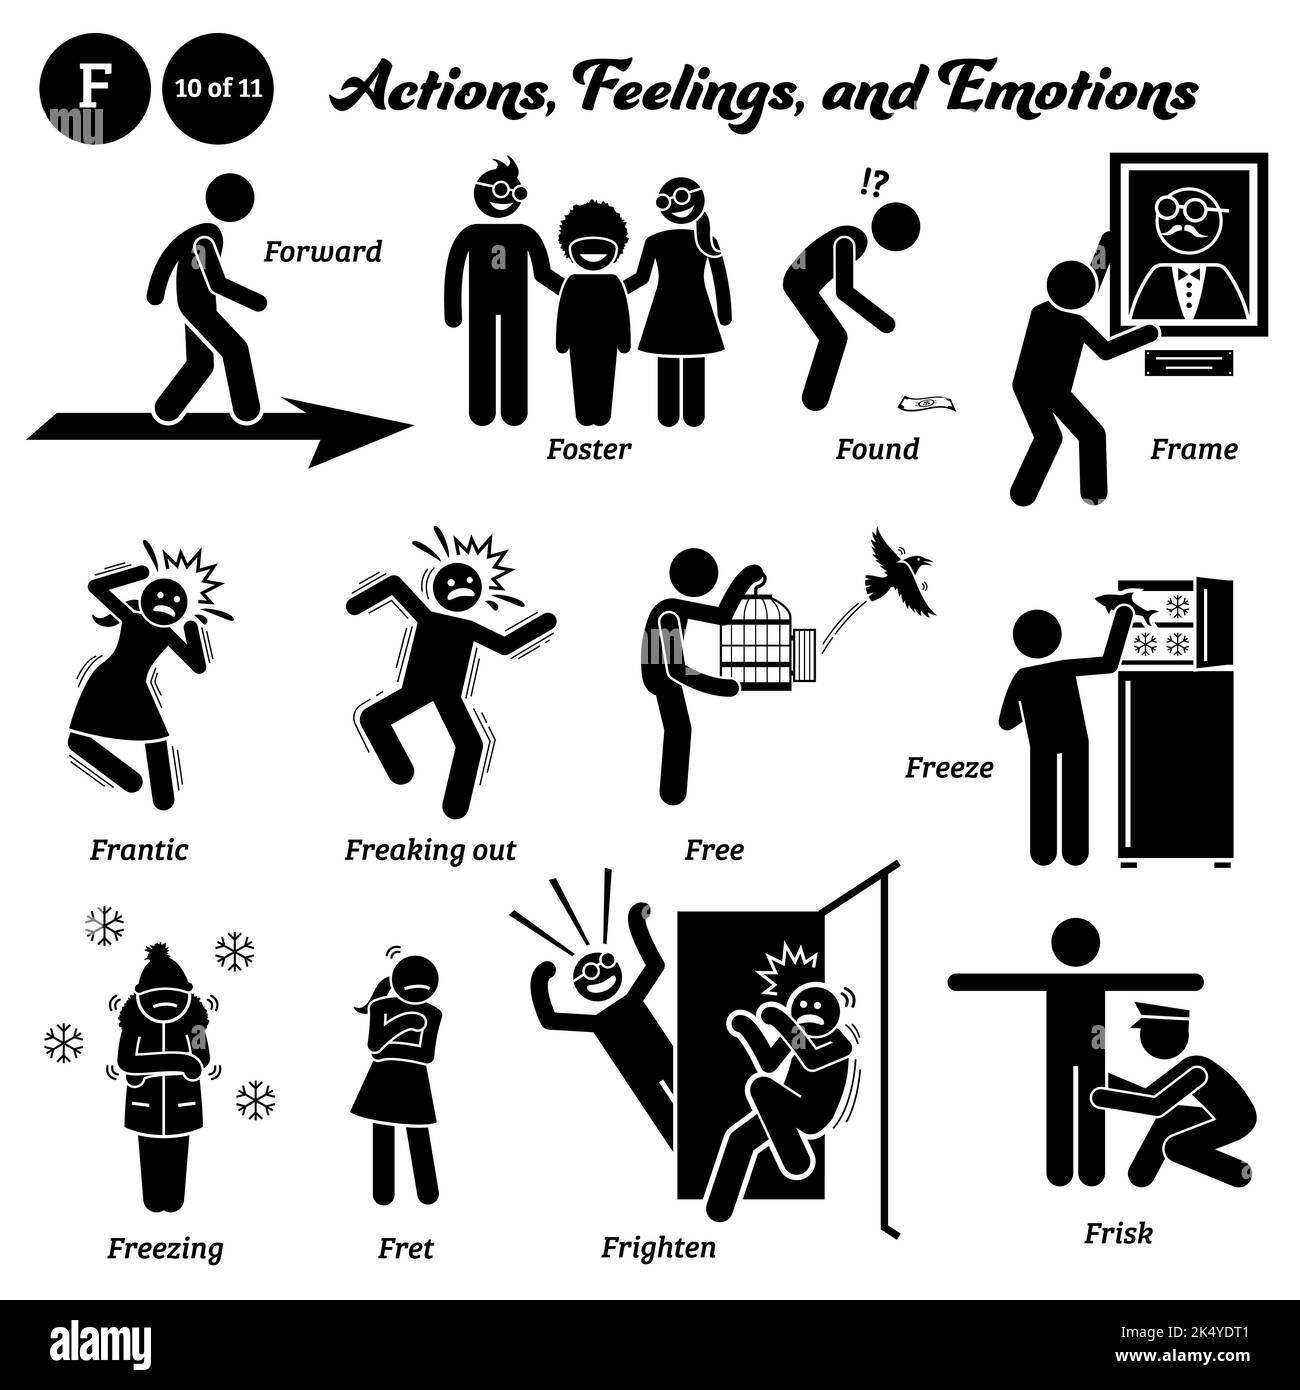 Stick figure human people man action, feelings, and emotions icons alphabet F. Forward, foster, found, frame, frantic, freaking out, free, freeze, fre Stock Vector